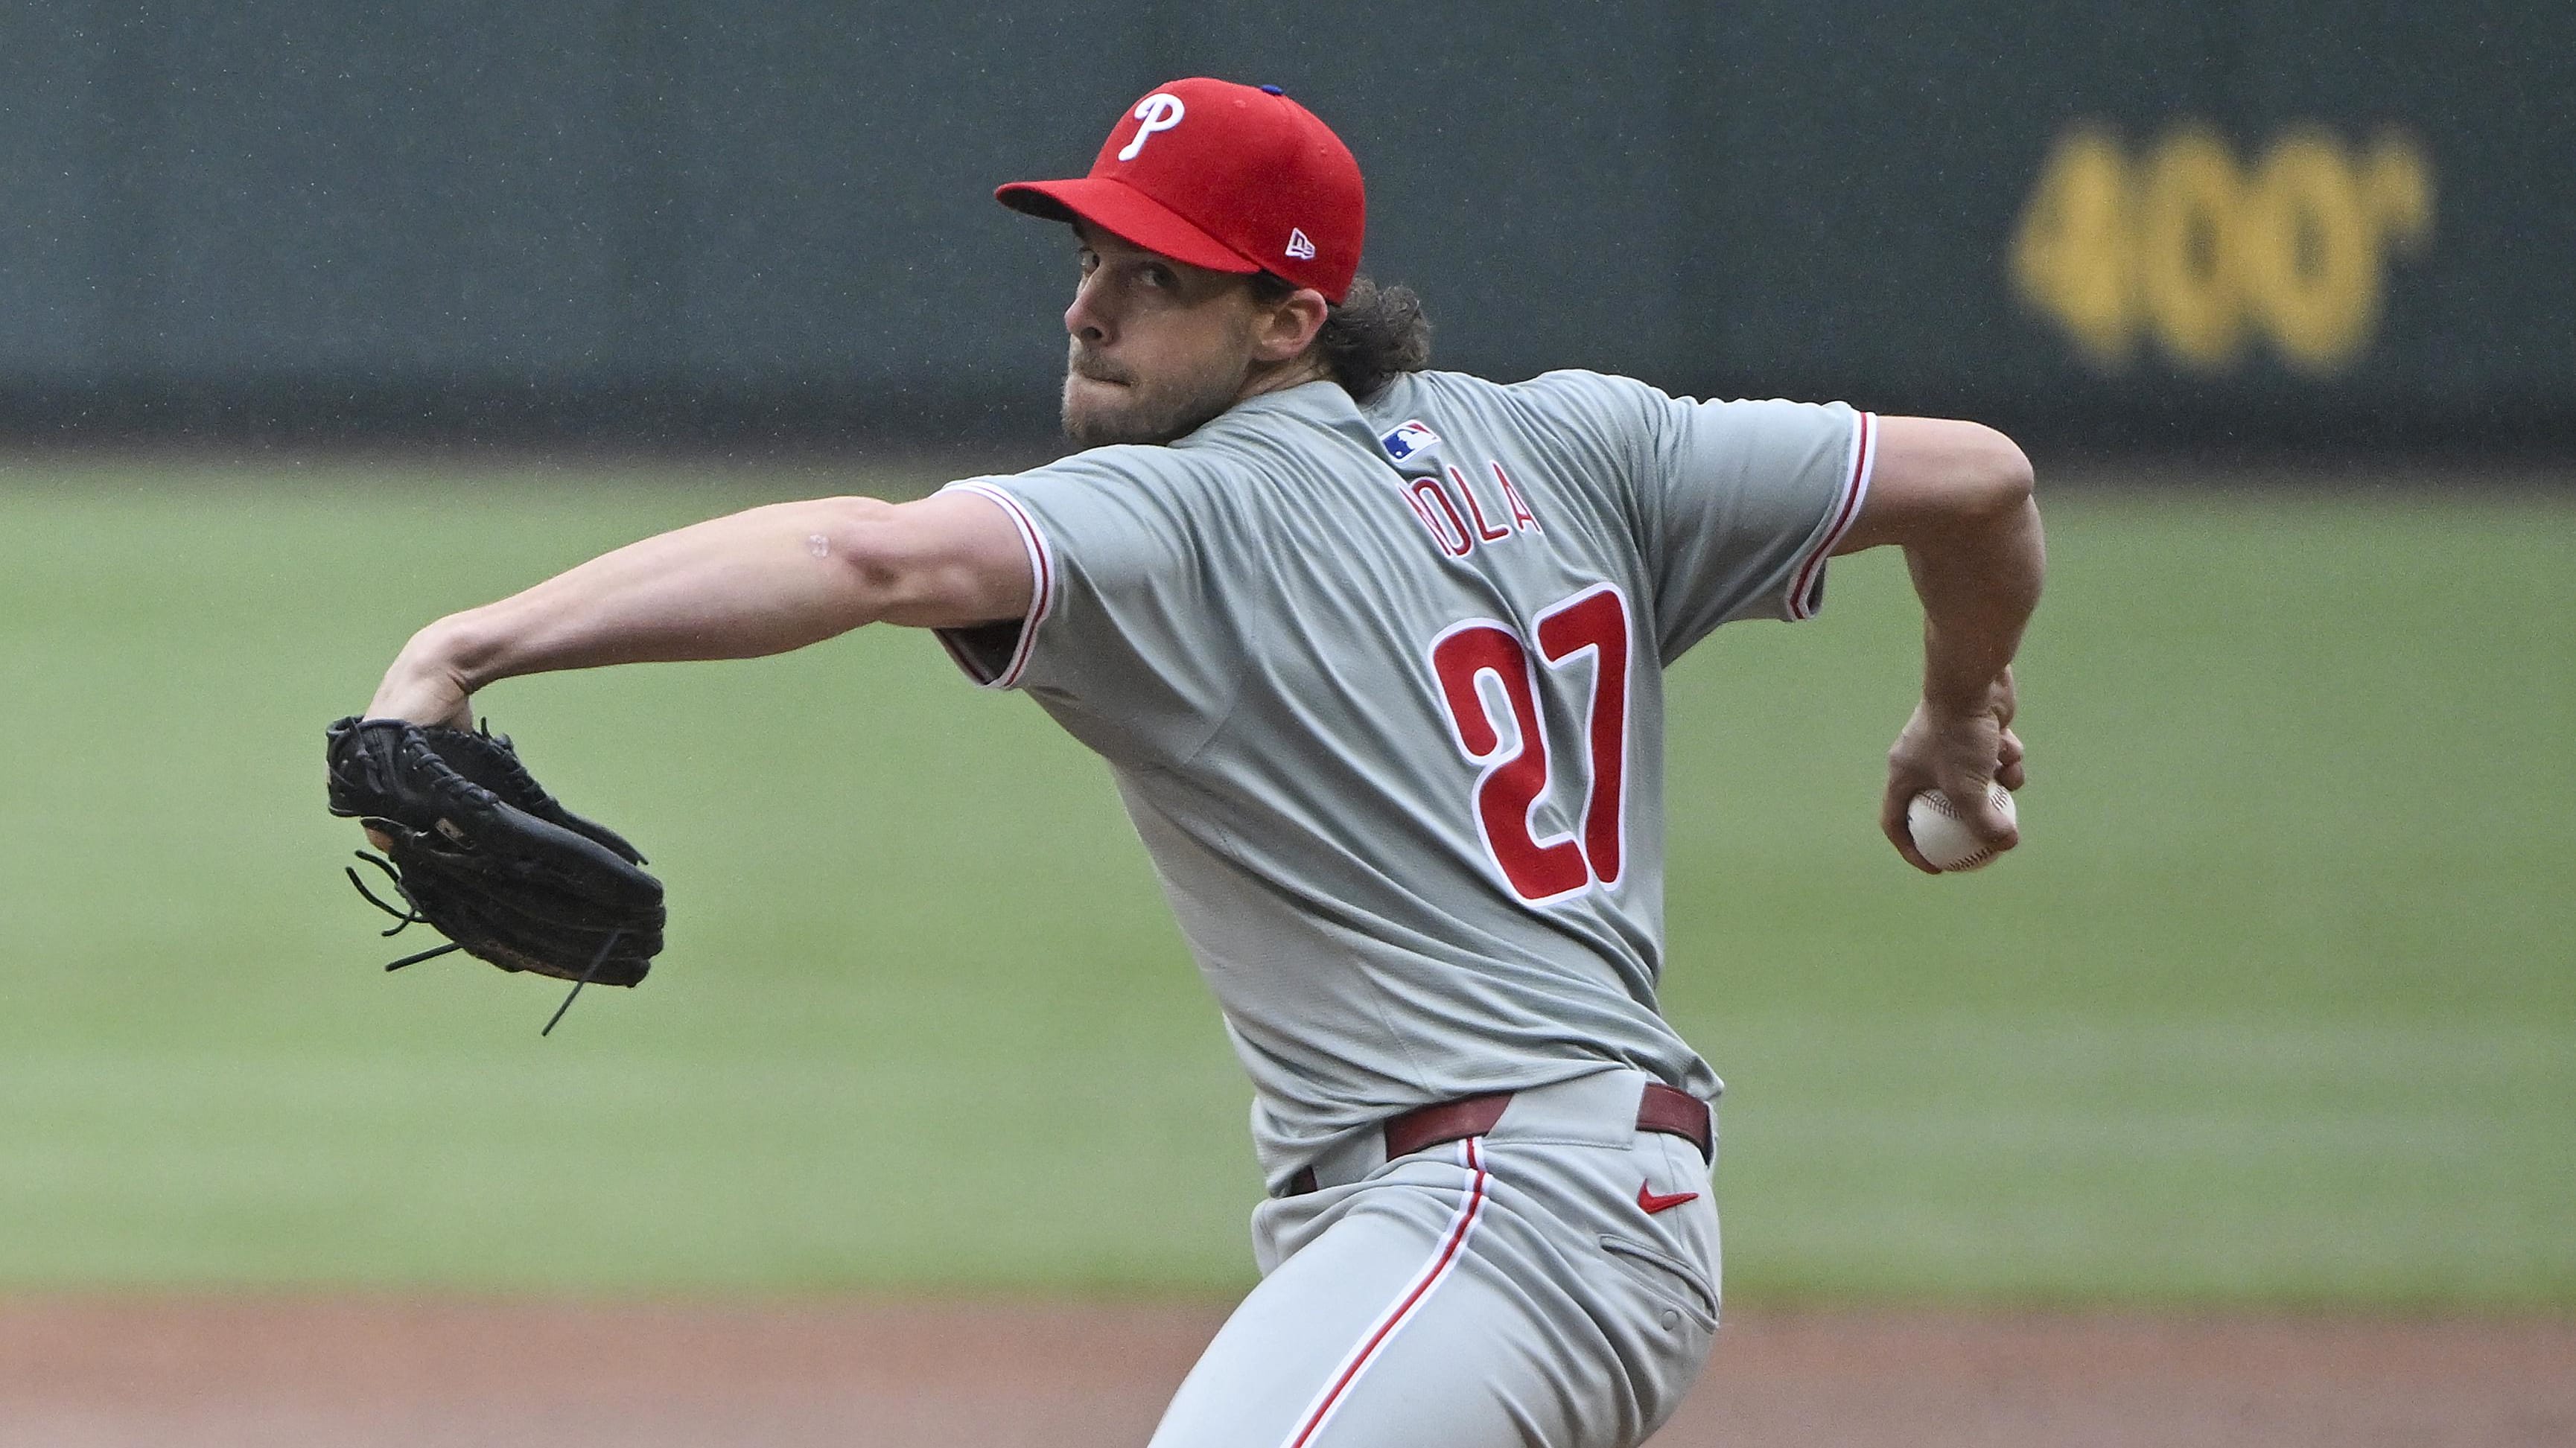 Philadelphia Phillies starting pitcher Aaron Nola's velocity was down for a second straight start